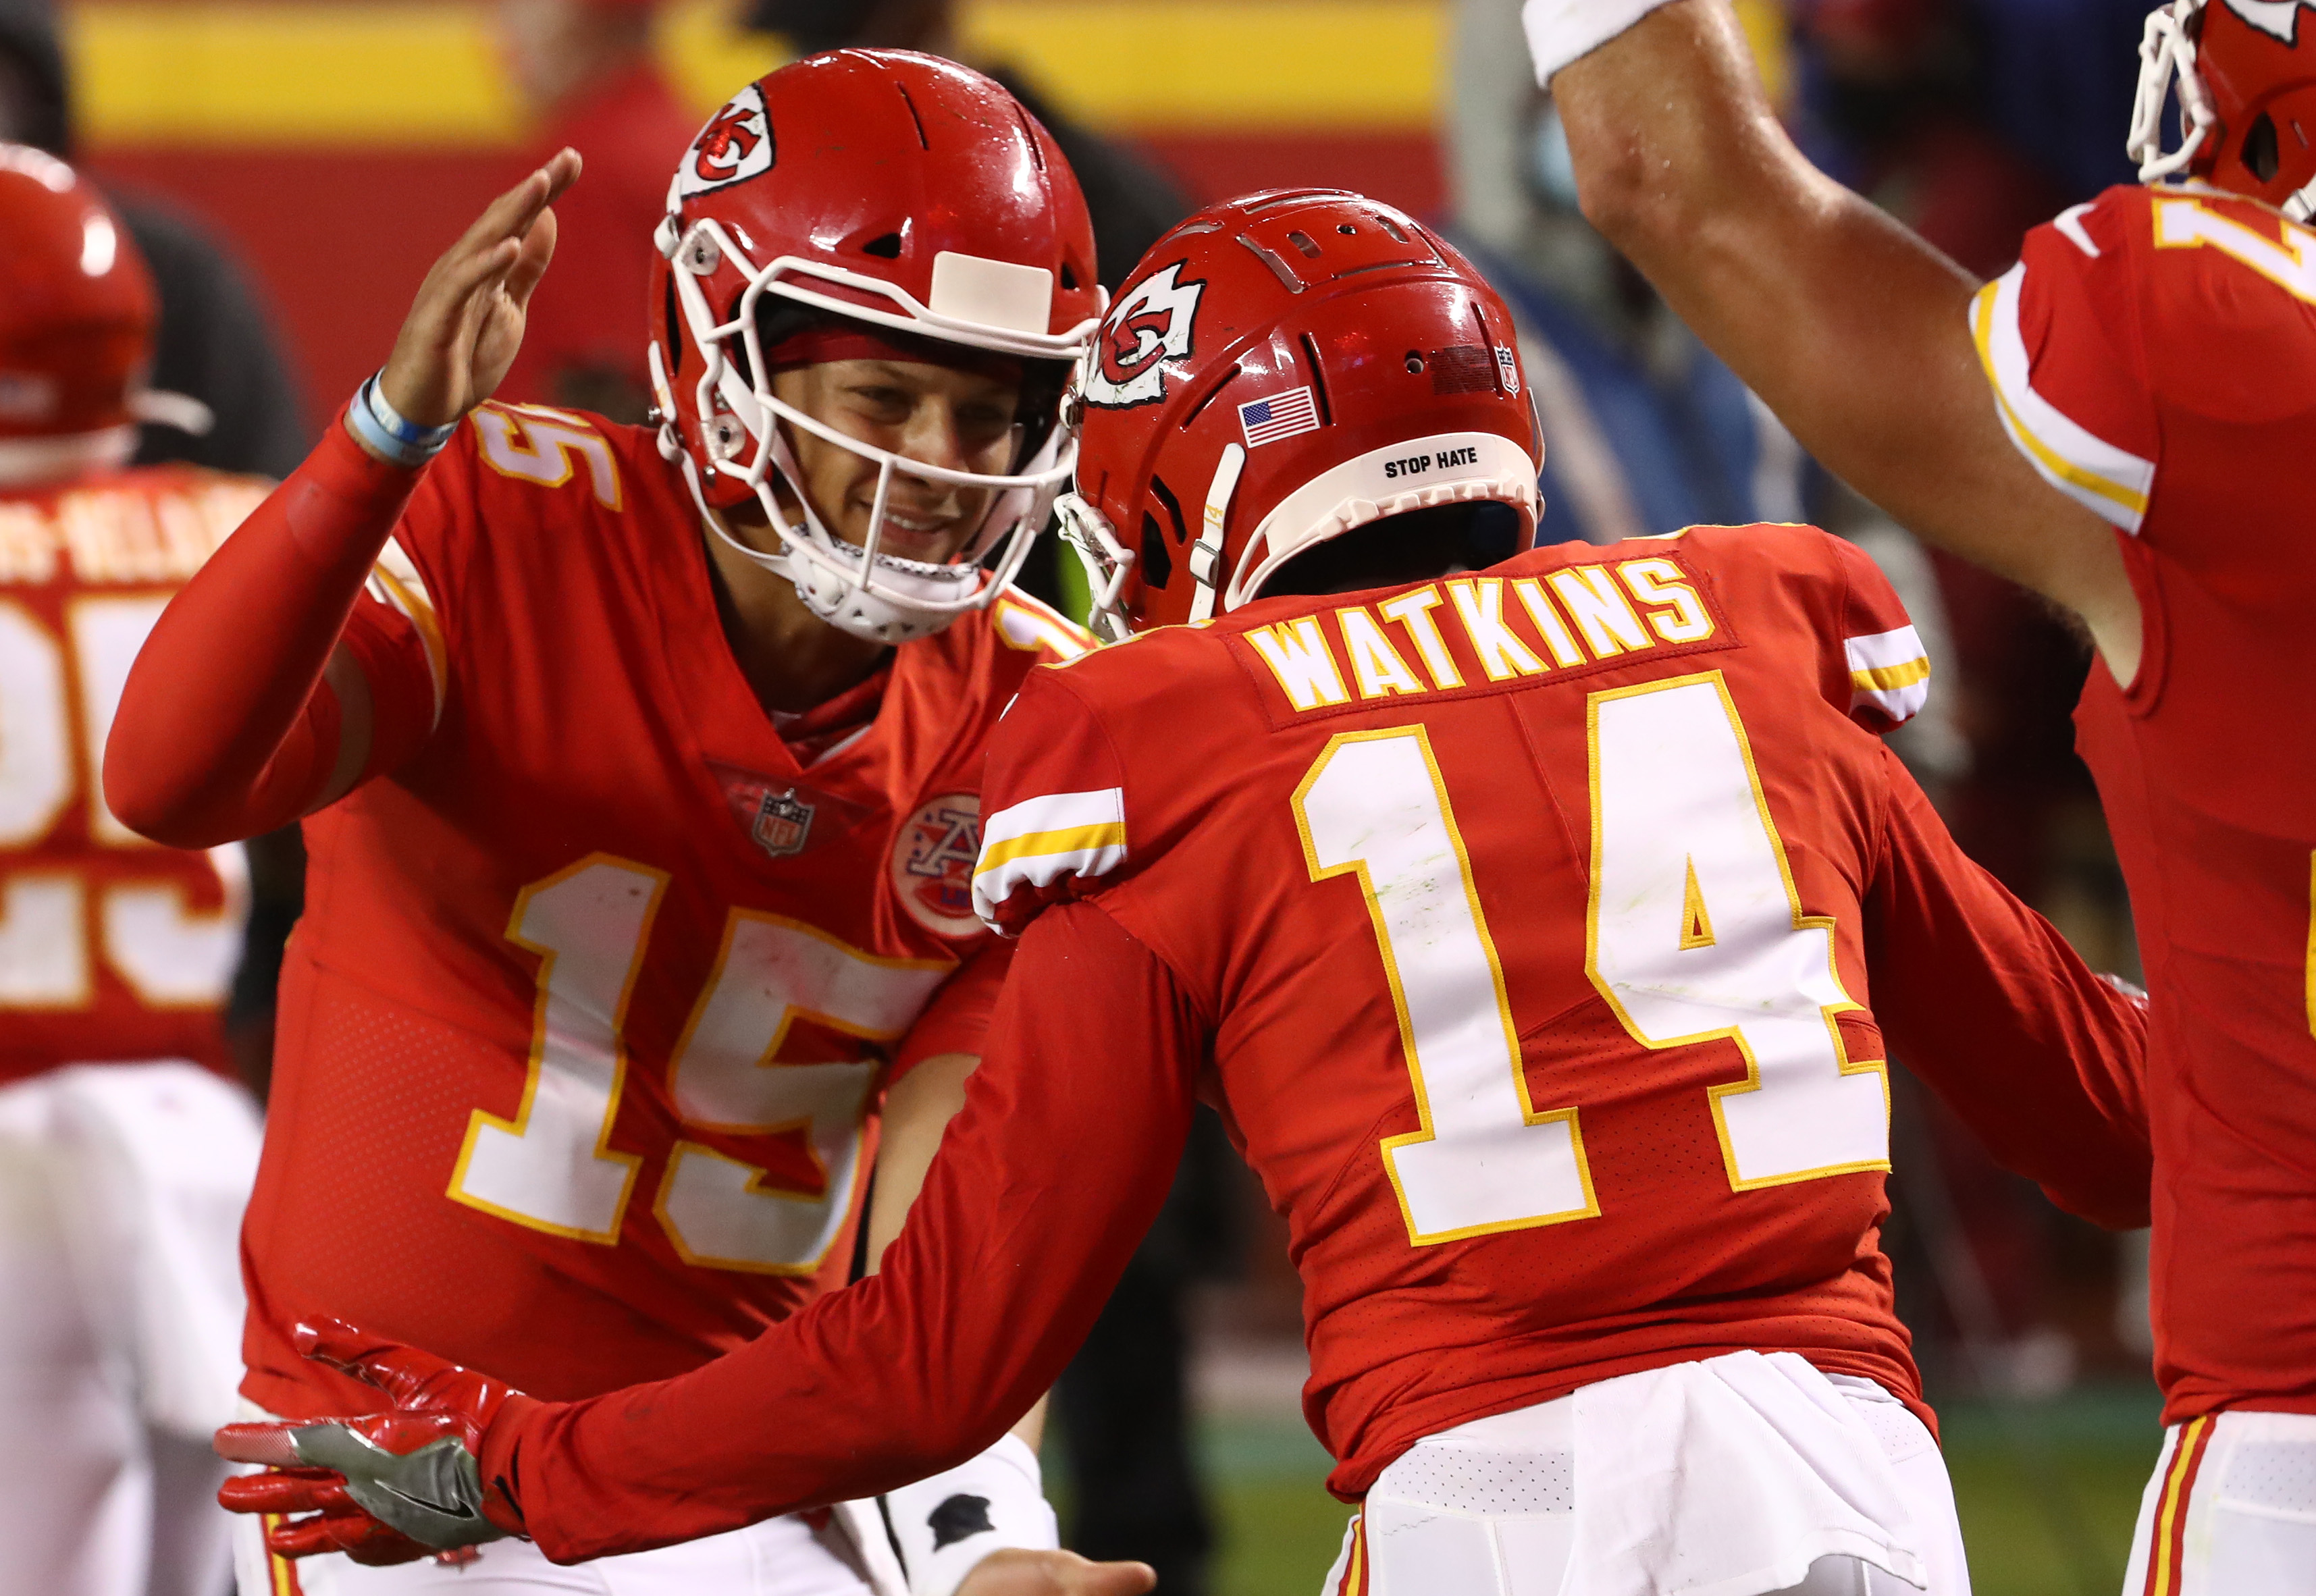 Patrick Mahomes #15 celebrates a touchdown with teammate Sammy Watkins #14 of the Kansas City Chiefs during the second quarter against the Houston Texans at Arrowhead Stadium on September 10, 2020 in Kansas City, Missouri.